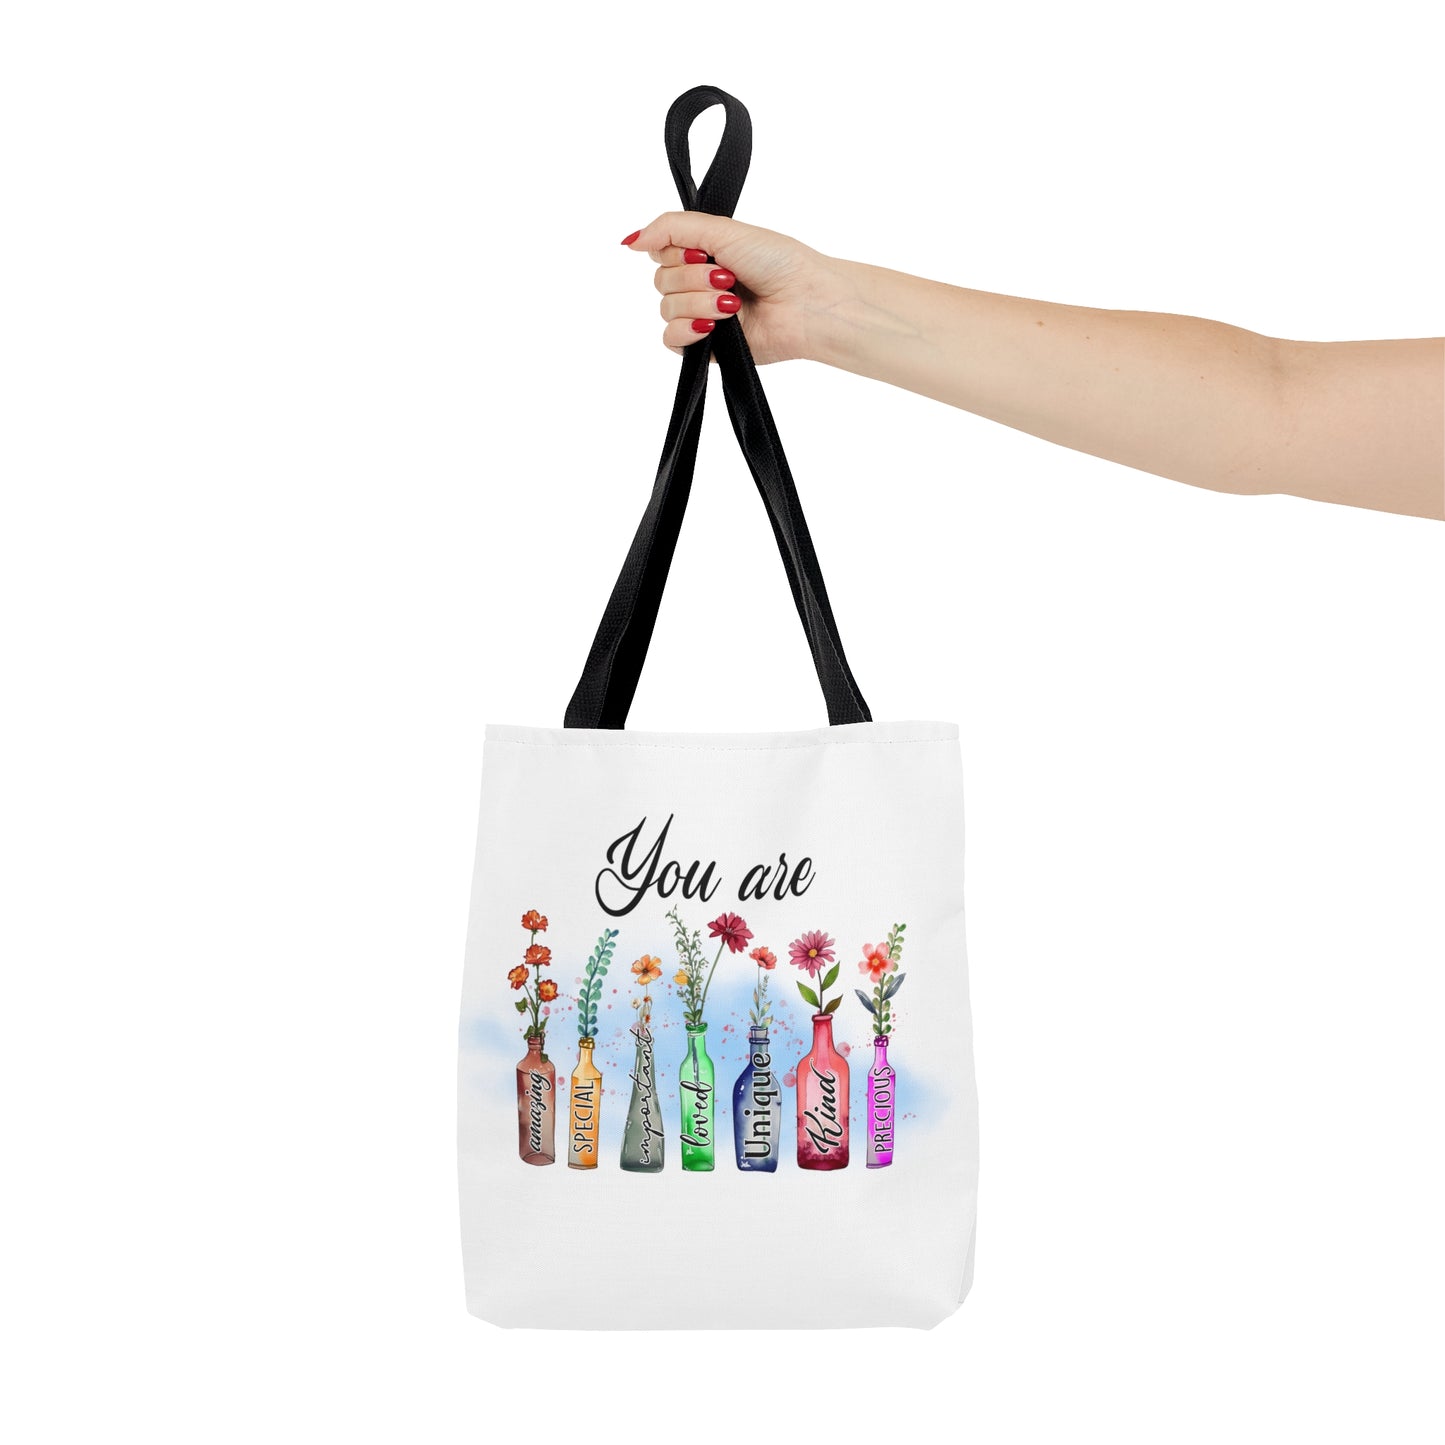 You Are, Inspirational Kindness Tote Bag